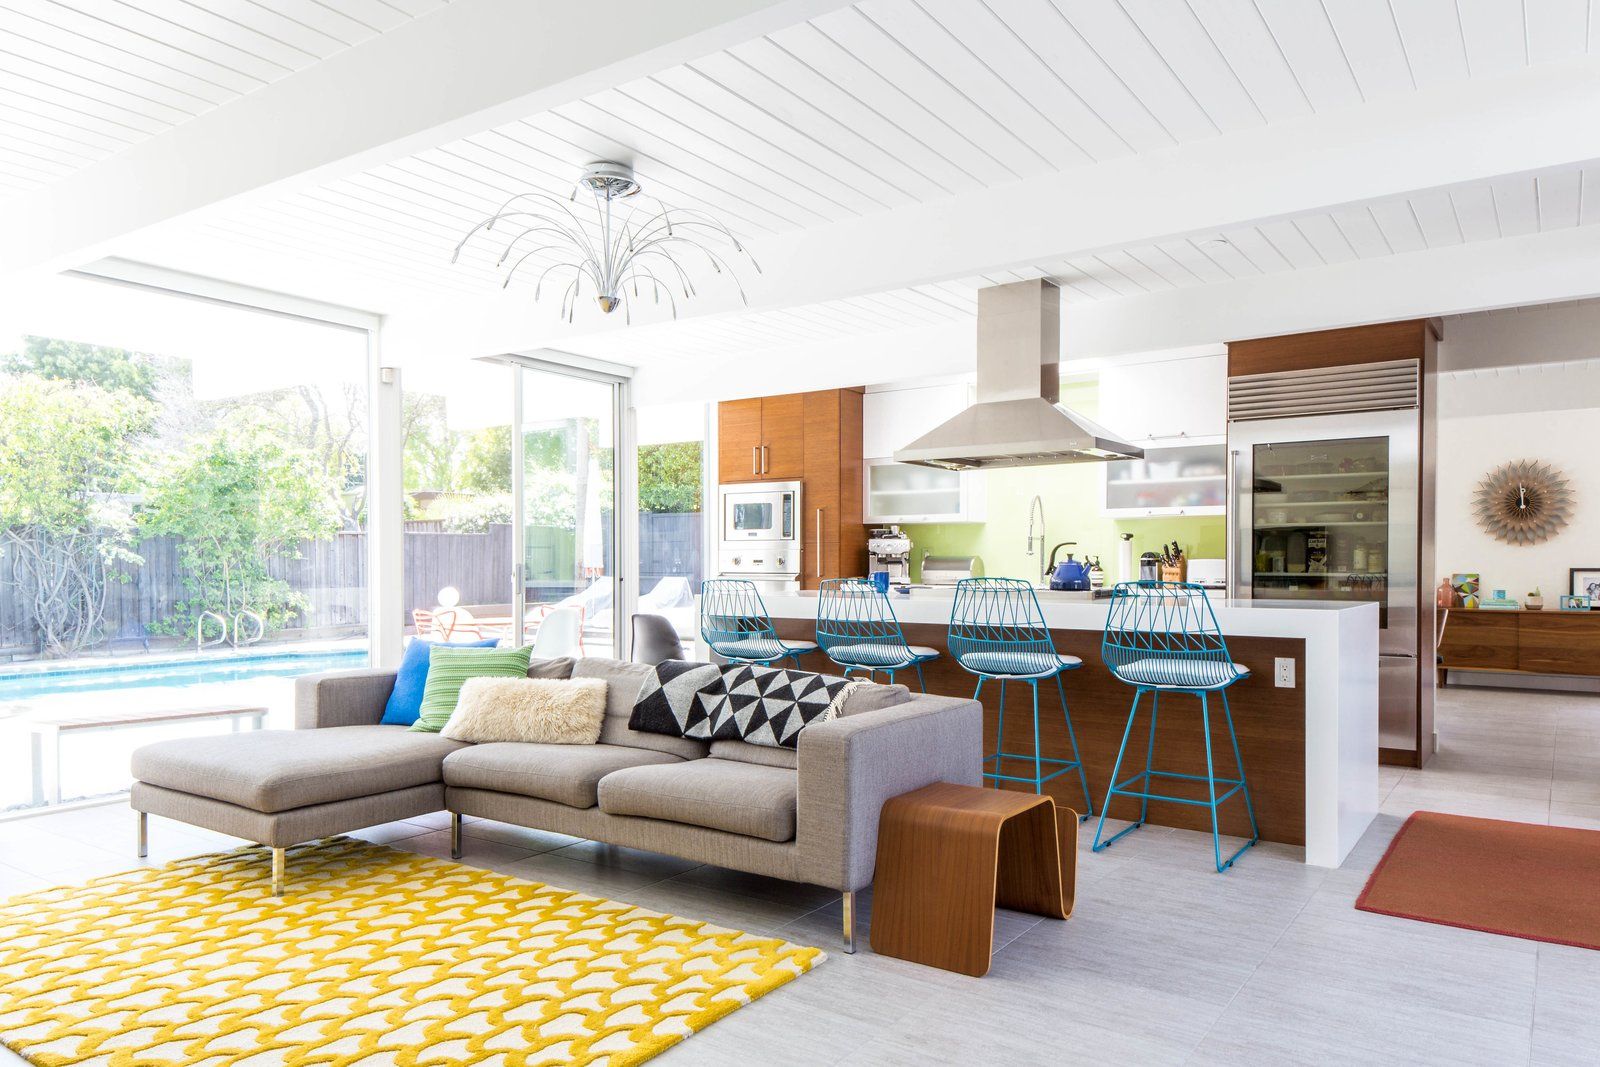 Restoring The Classics: Tips For Renovating Mid Century Homes